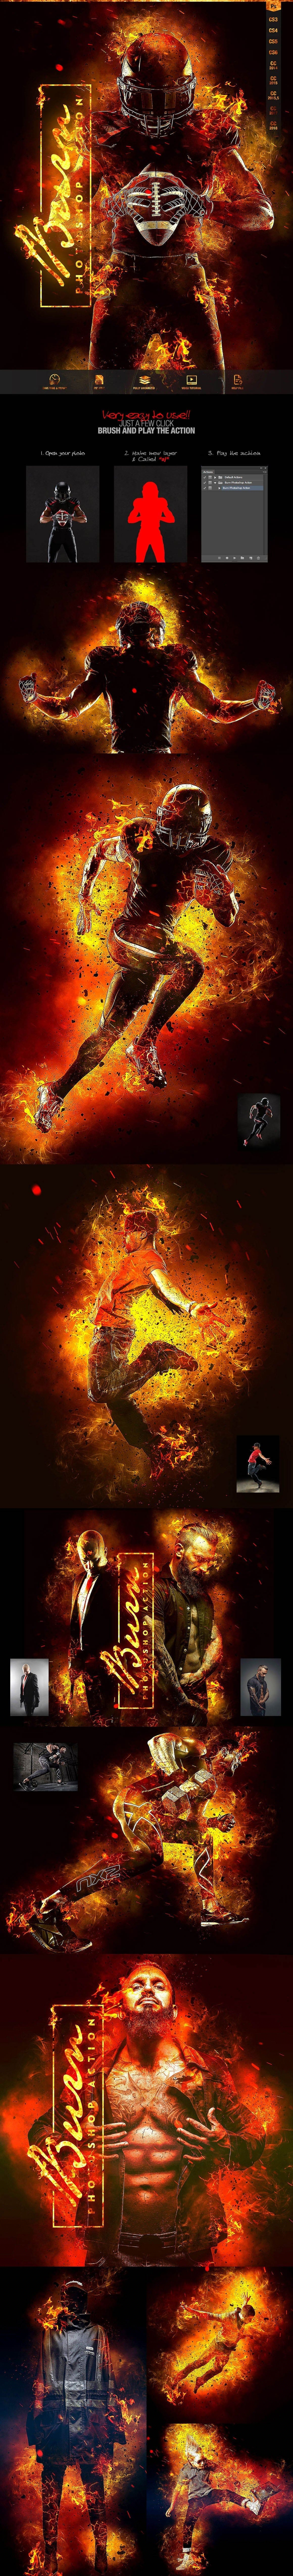 Fire photoshop with action design by Amorjesu.